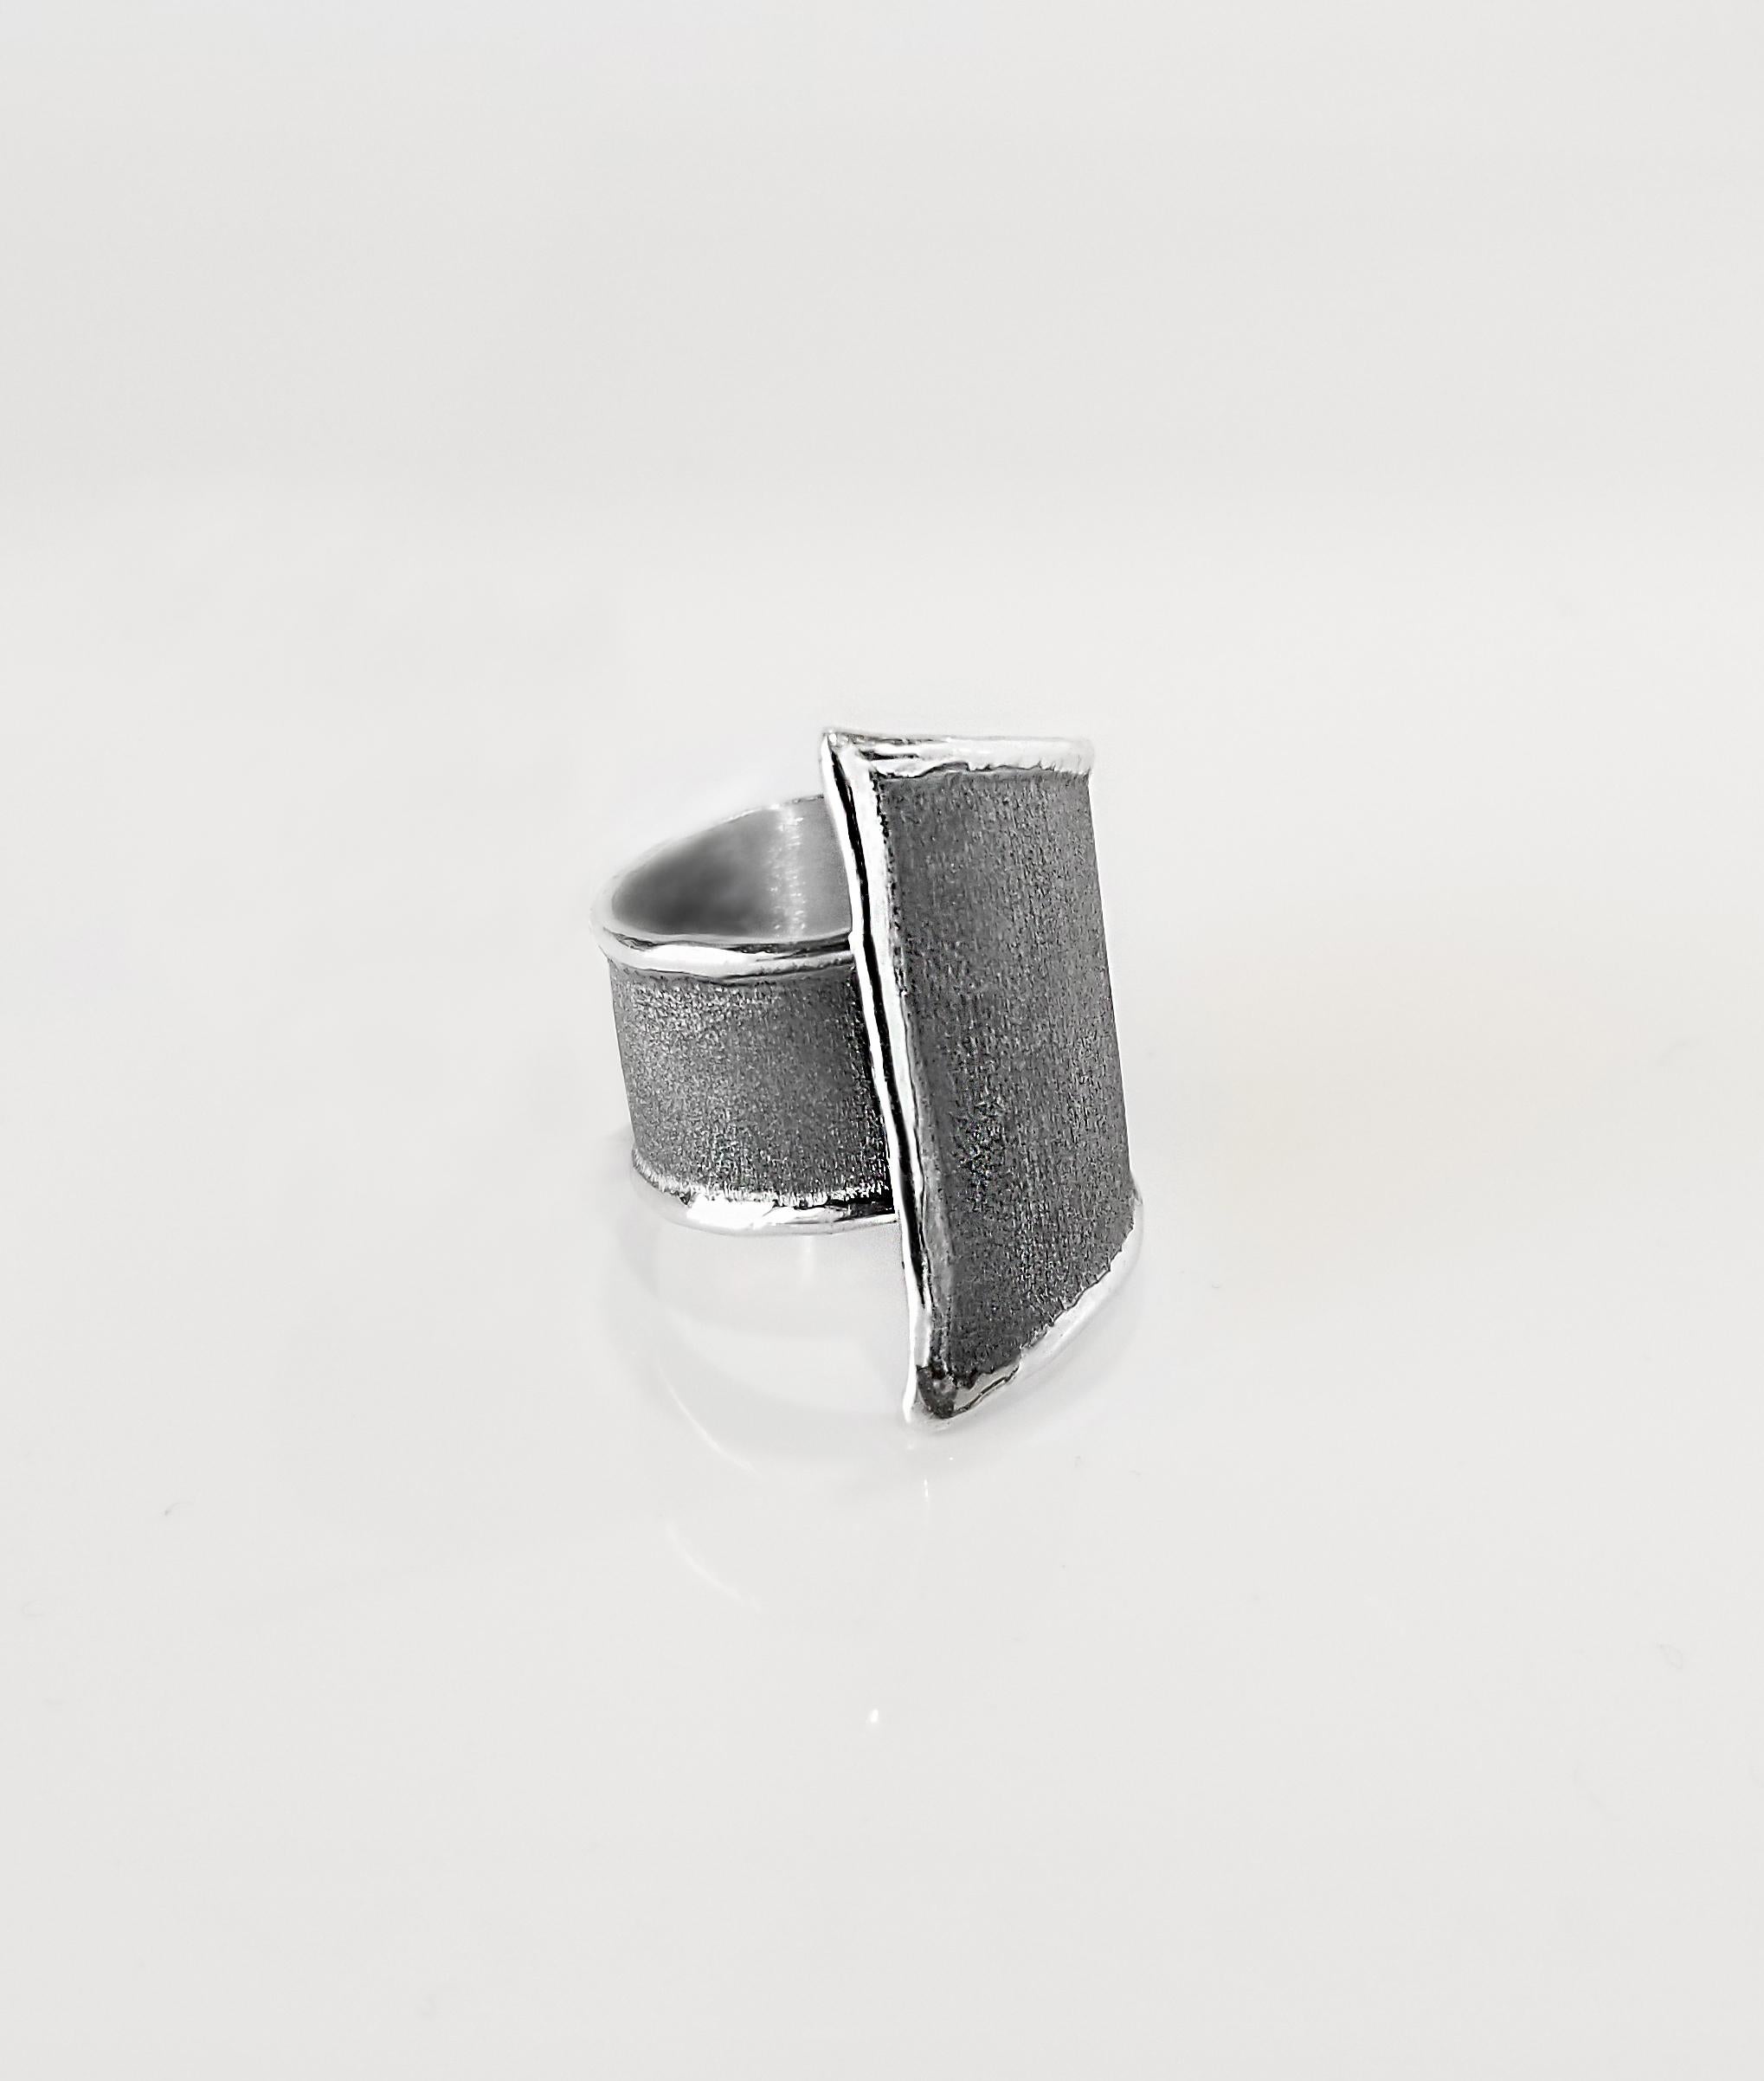 Contemporary Yianni Creations Geometric Fine Silver and Oxidized Rhodium Artisan Band Ring For Sale